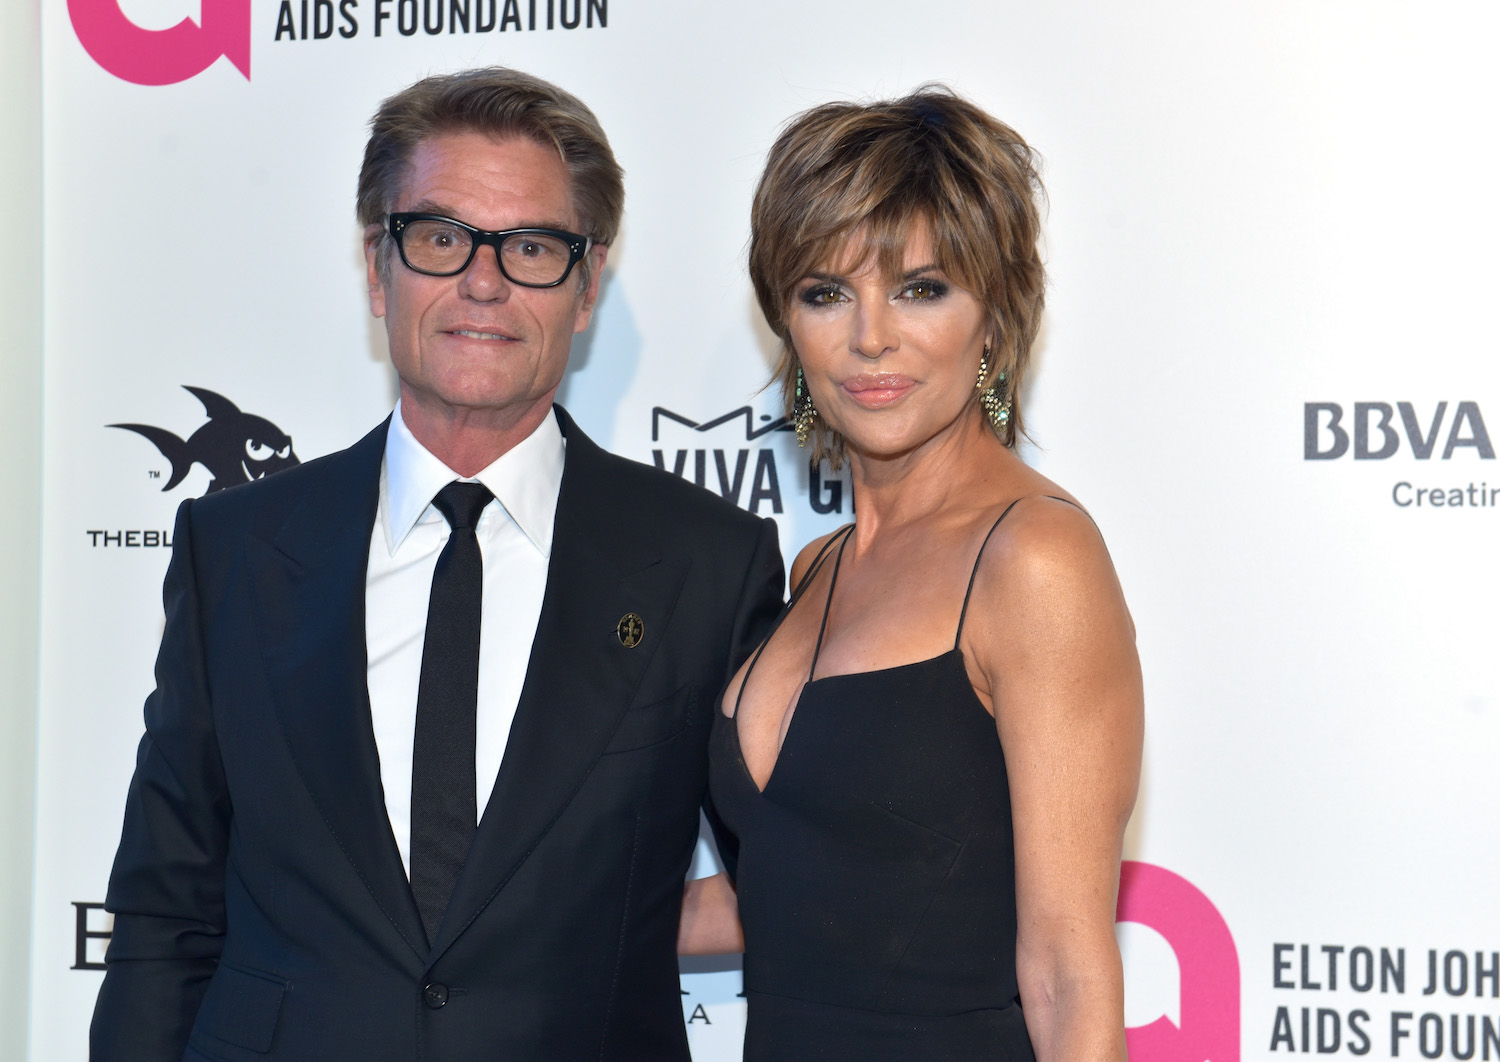 Harry Hamlin standing next to Lisa Rinna at an event in 2018